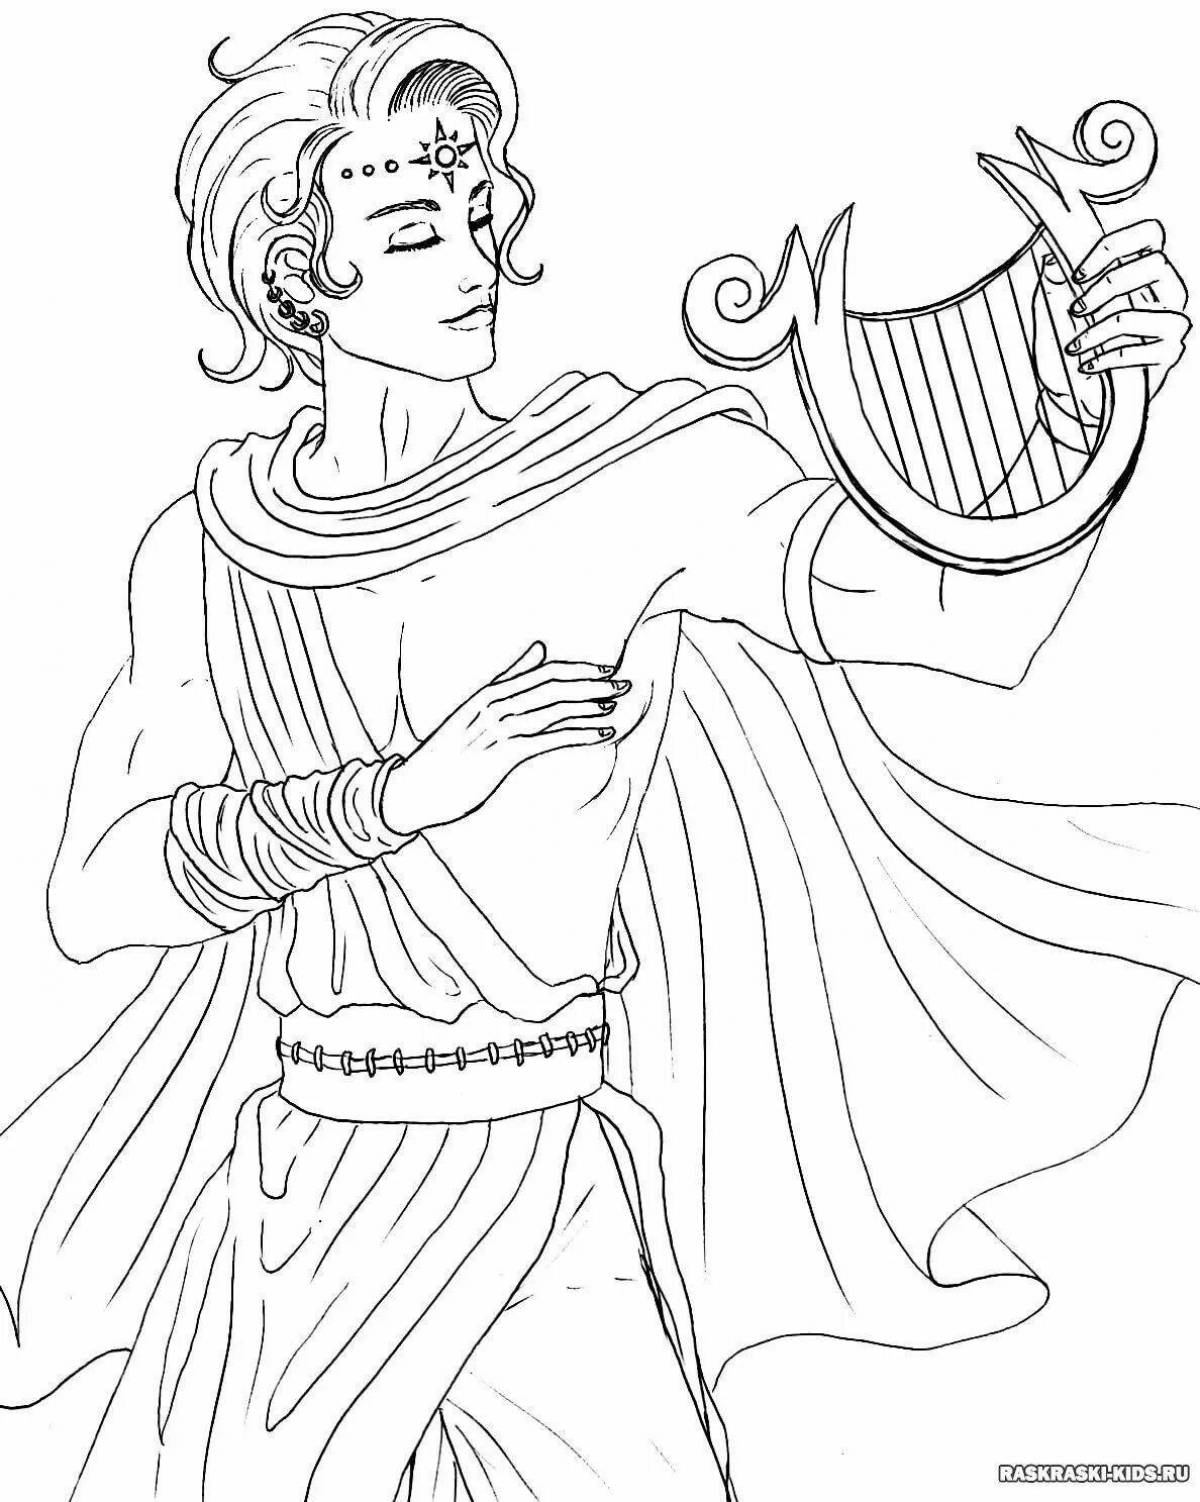 Ancient greece fantasy coloring book for kids